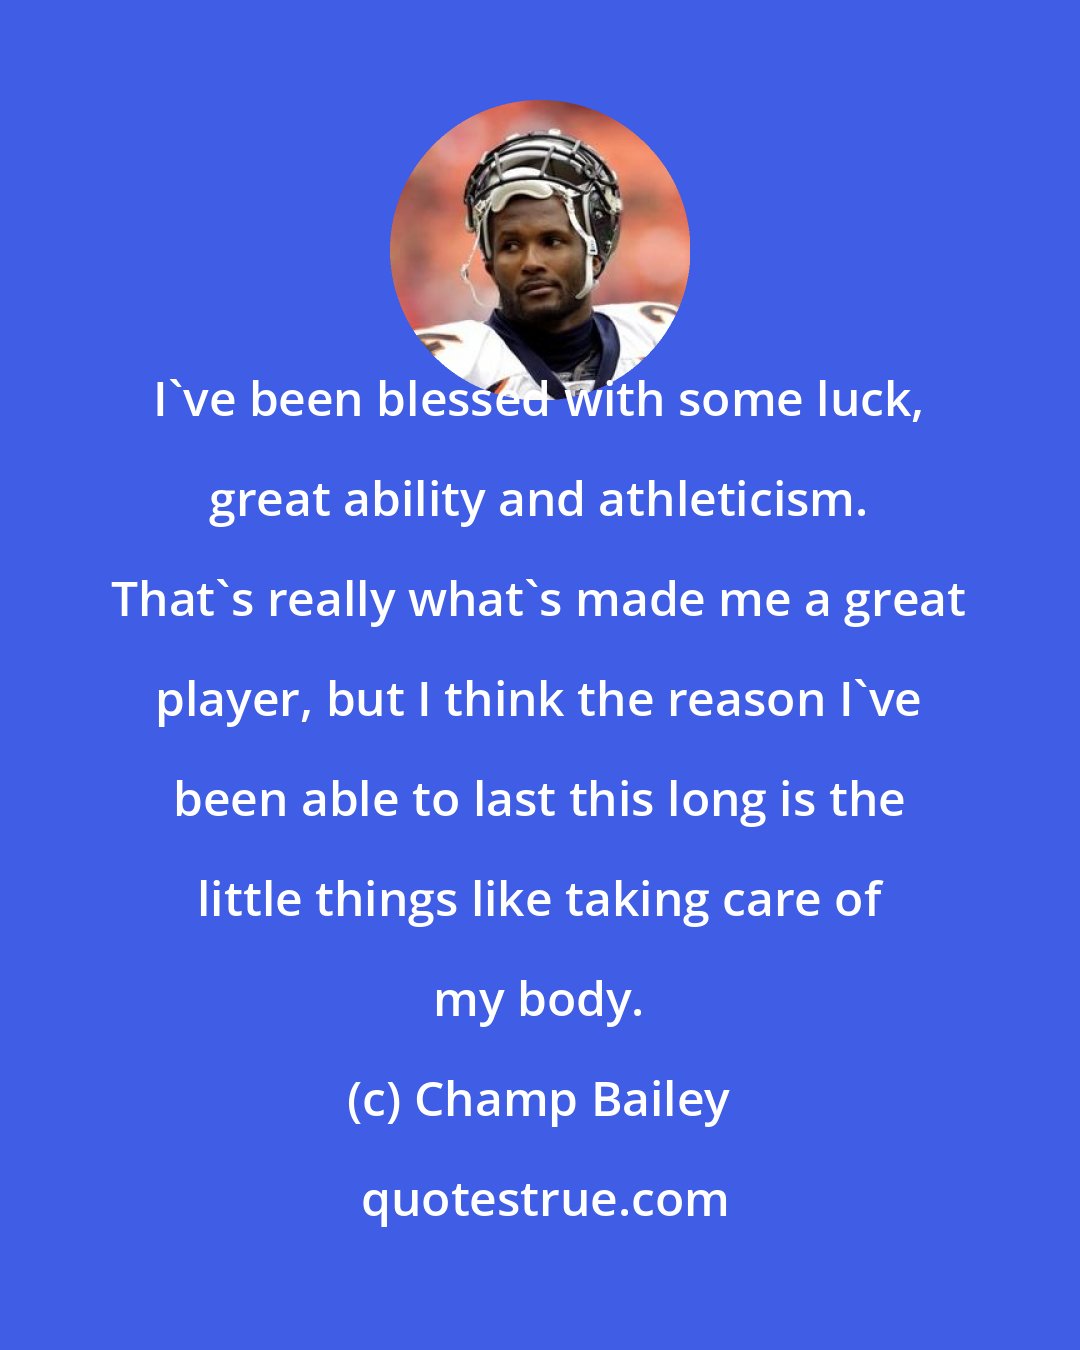 Champ Bailey: I've been blessed with some luck, great ability and athleticism. That's really what's made me a great player, but I think the reason I've been able to last this long is the little things like taking care of my body.